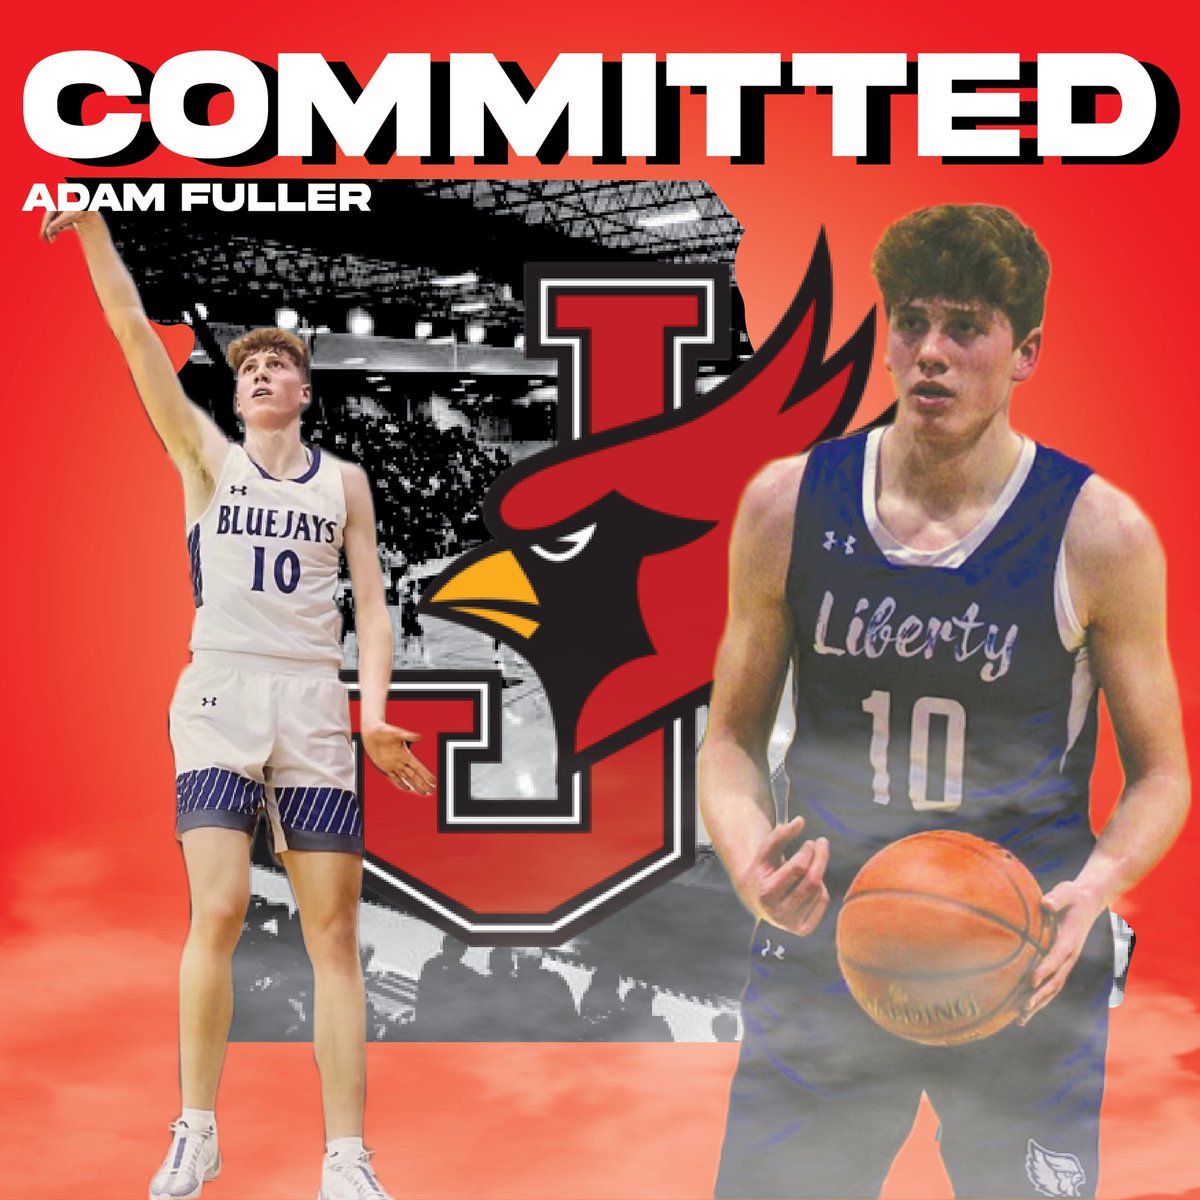 Blessed to announce my commitment to @JewellHoops! Thank you @CoachMcCabe and @CoachHildy for this opportunity!